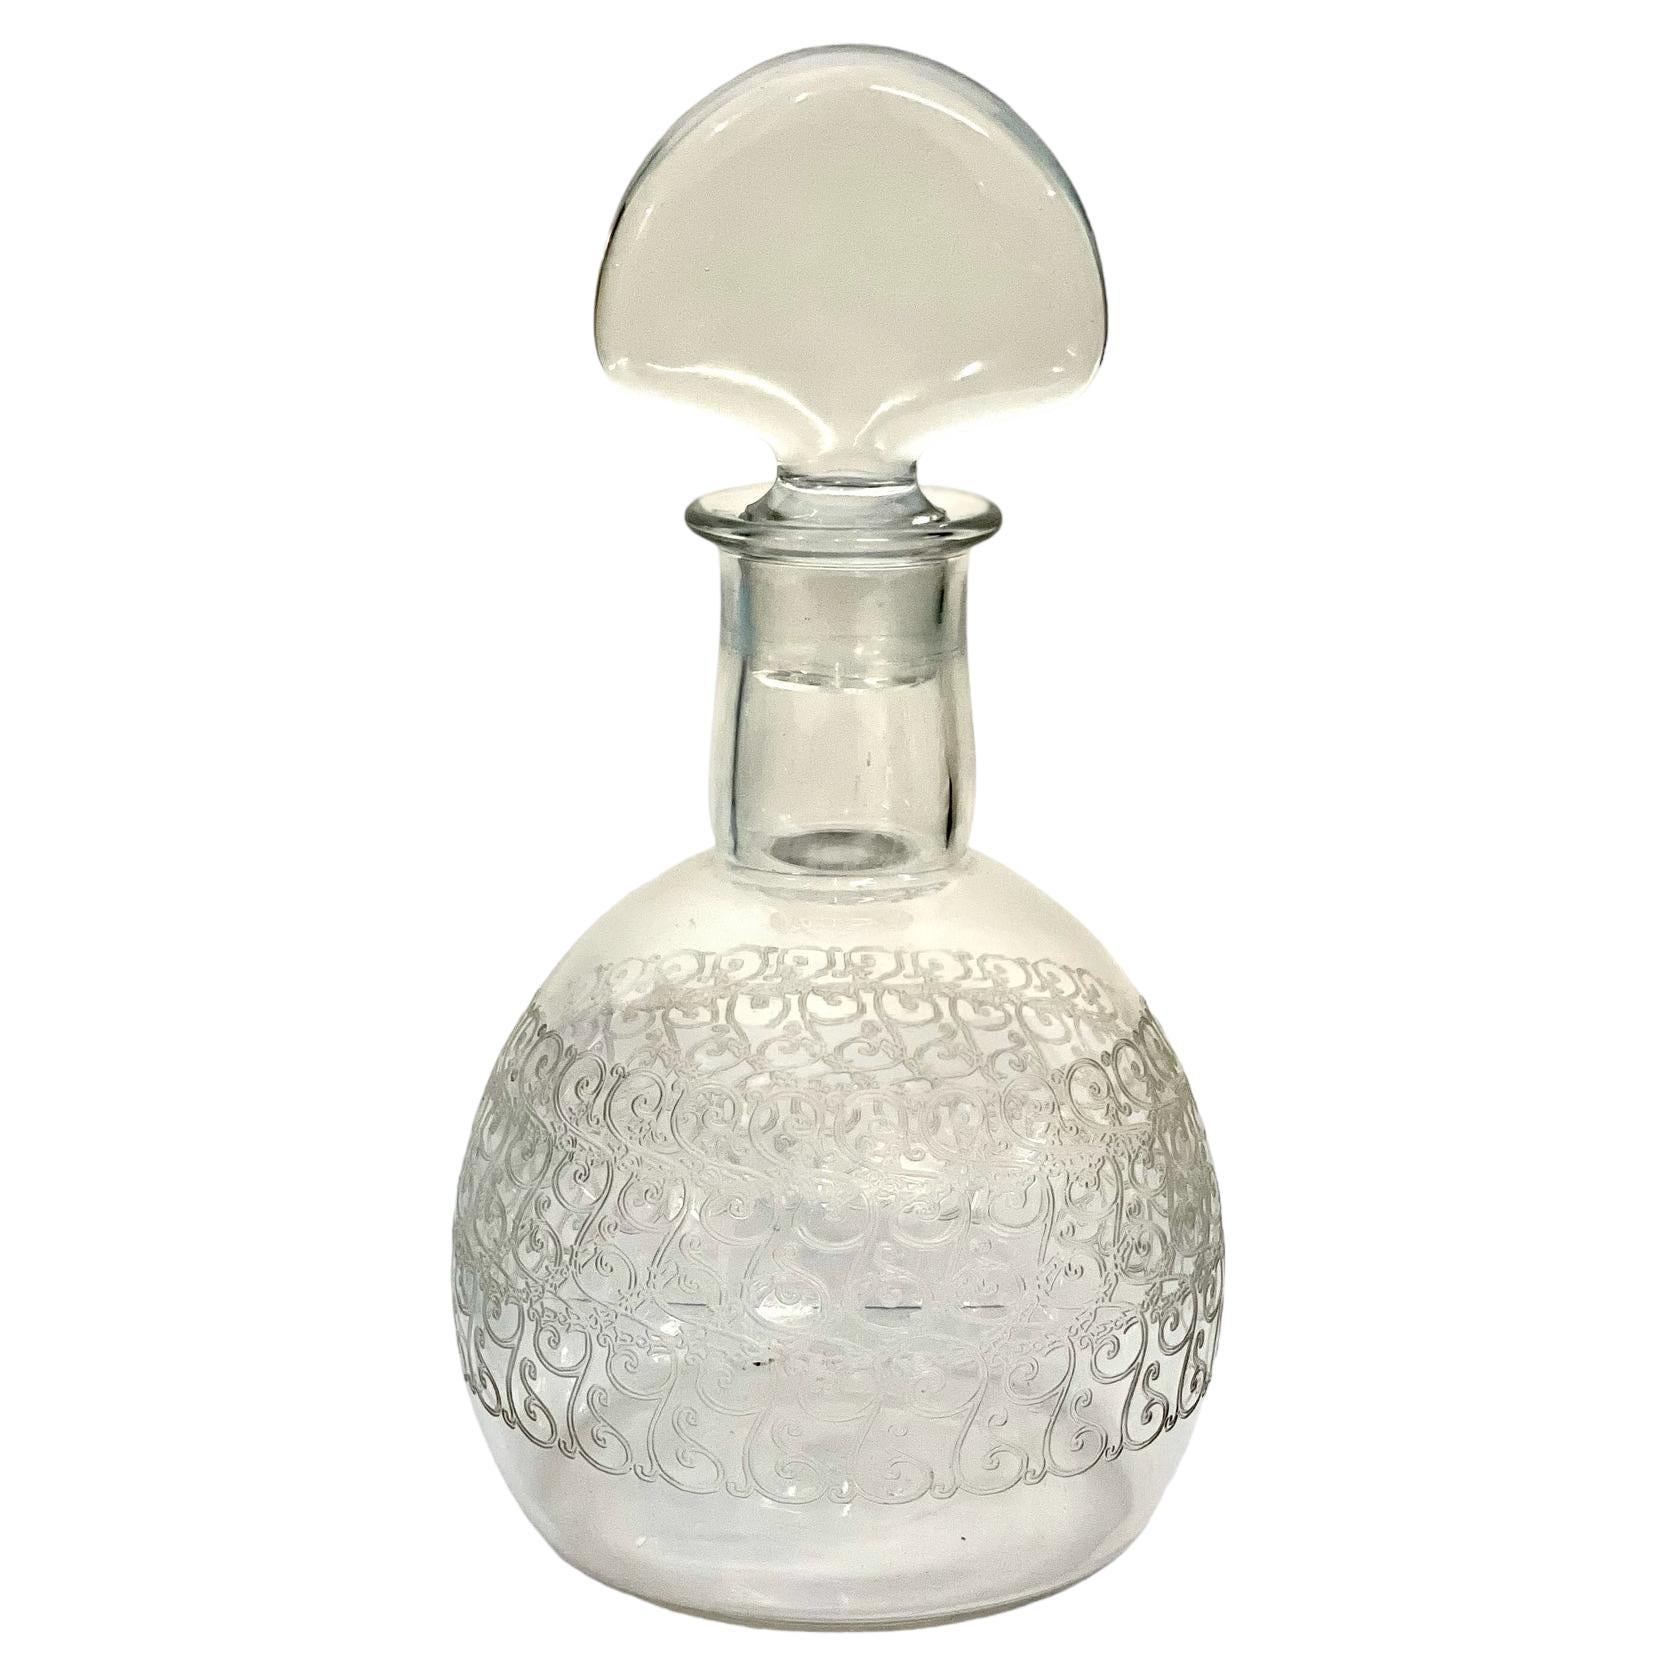 Baccarat 'Rohan' Engraved Crystal Decanter with Stopper 